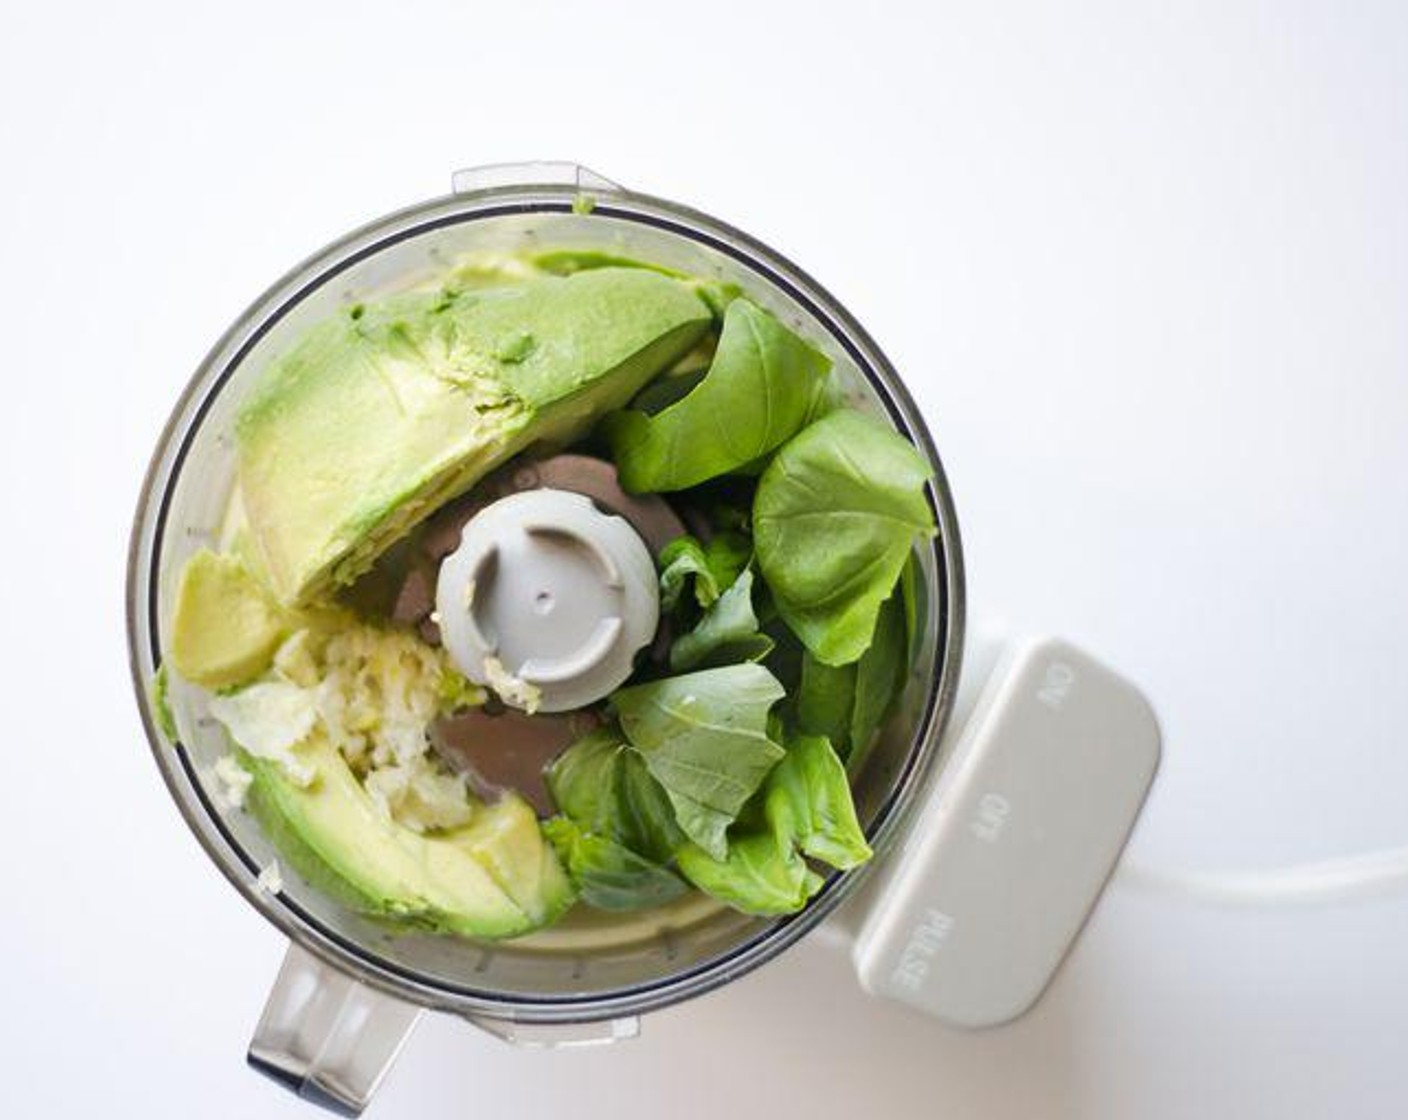 step 1 In a food processor, blend Avocado (1), Garlic (1 clove), Fresh Basil (1/2 cup), and 1 Tbsp of juice from Lemon (1) until smooth, then mix in Extra-Virgin Olive Oil (2 Tbsp).